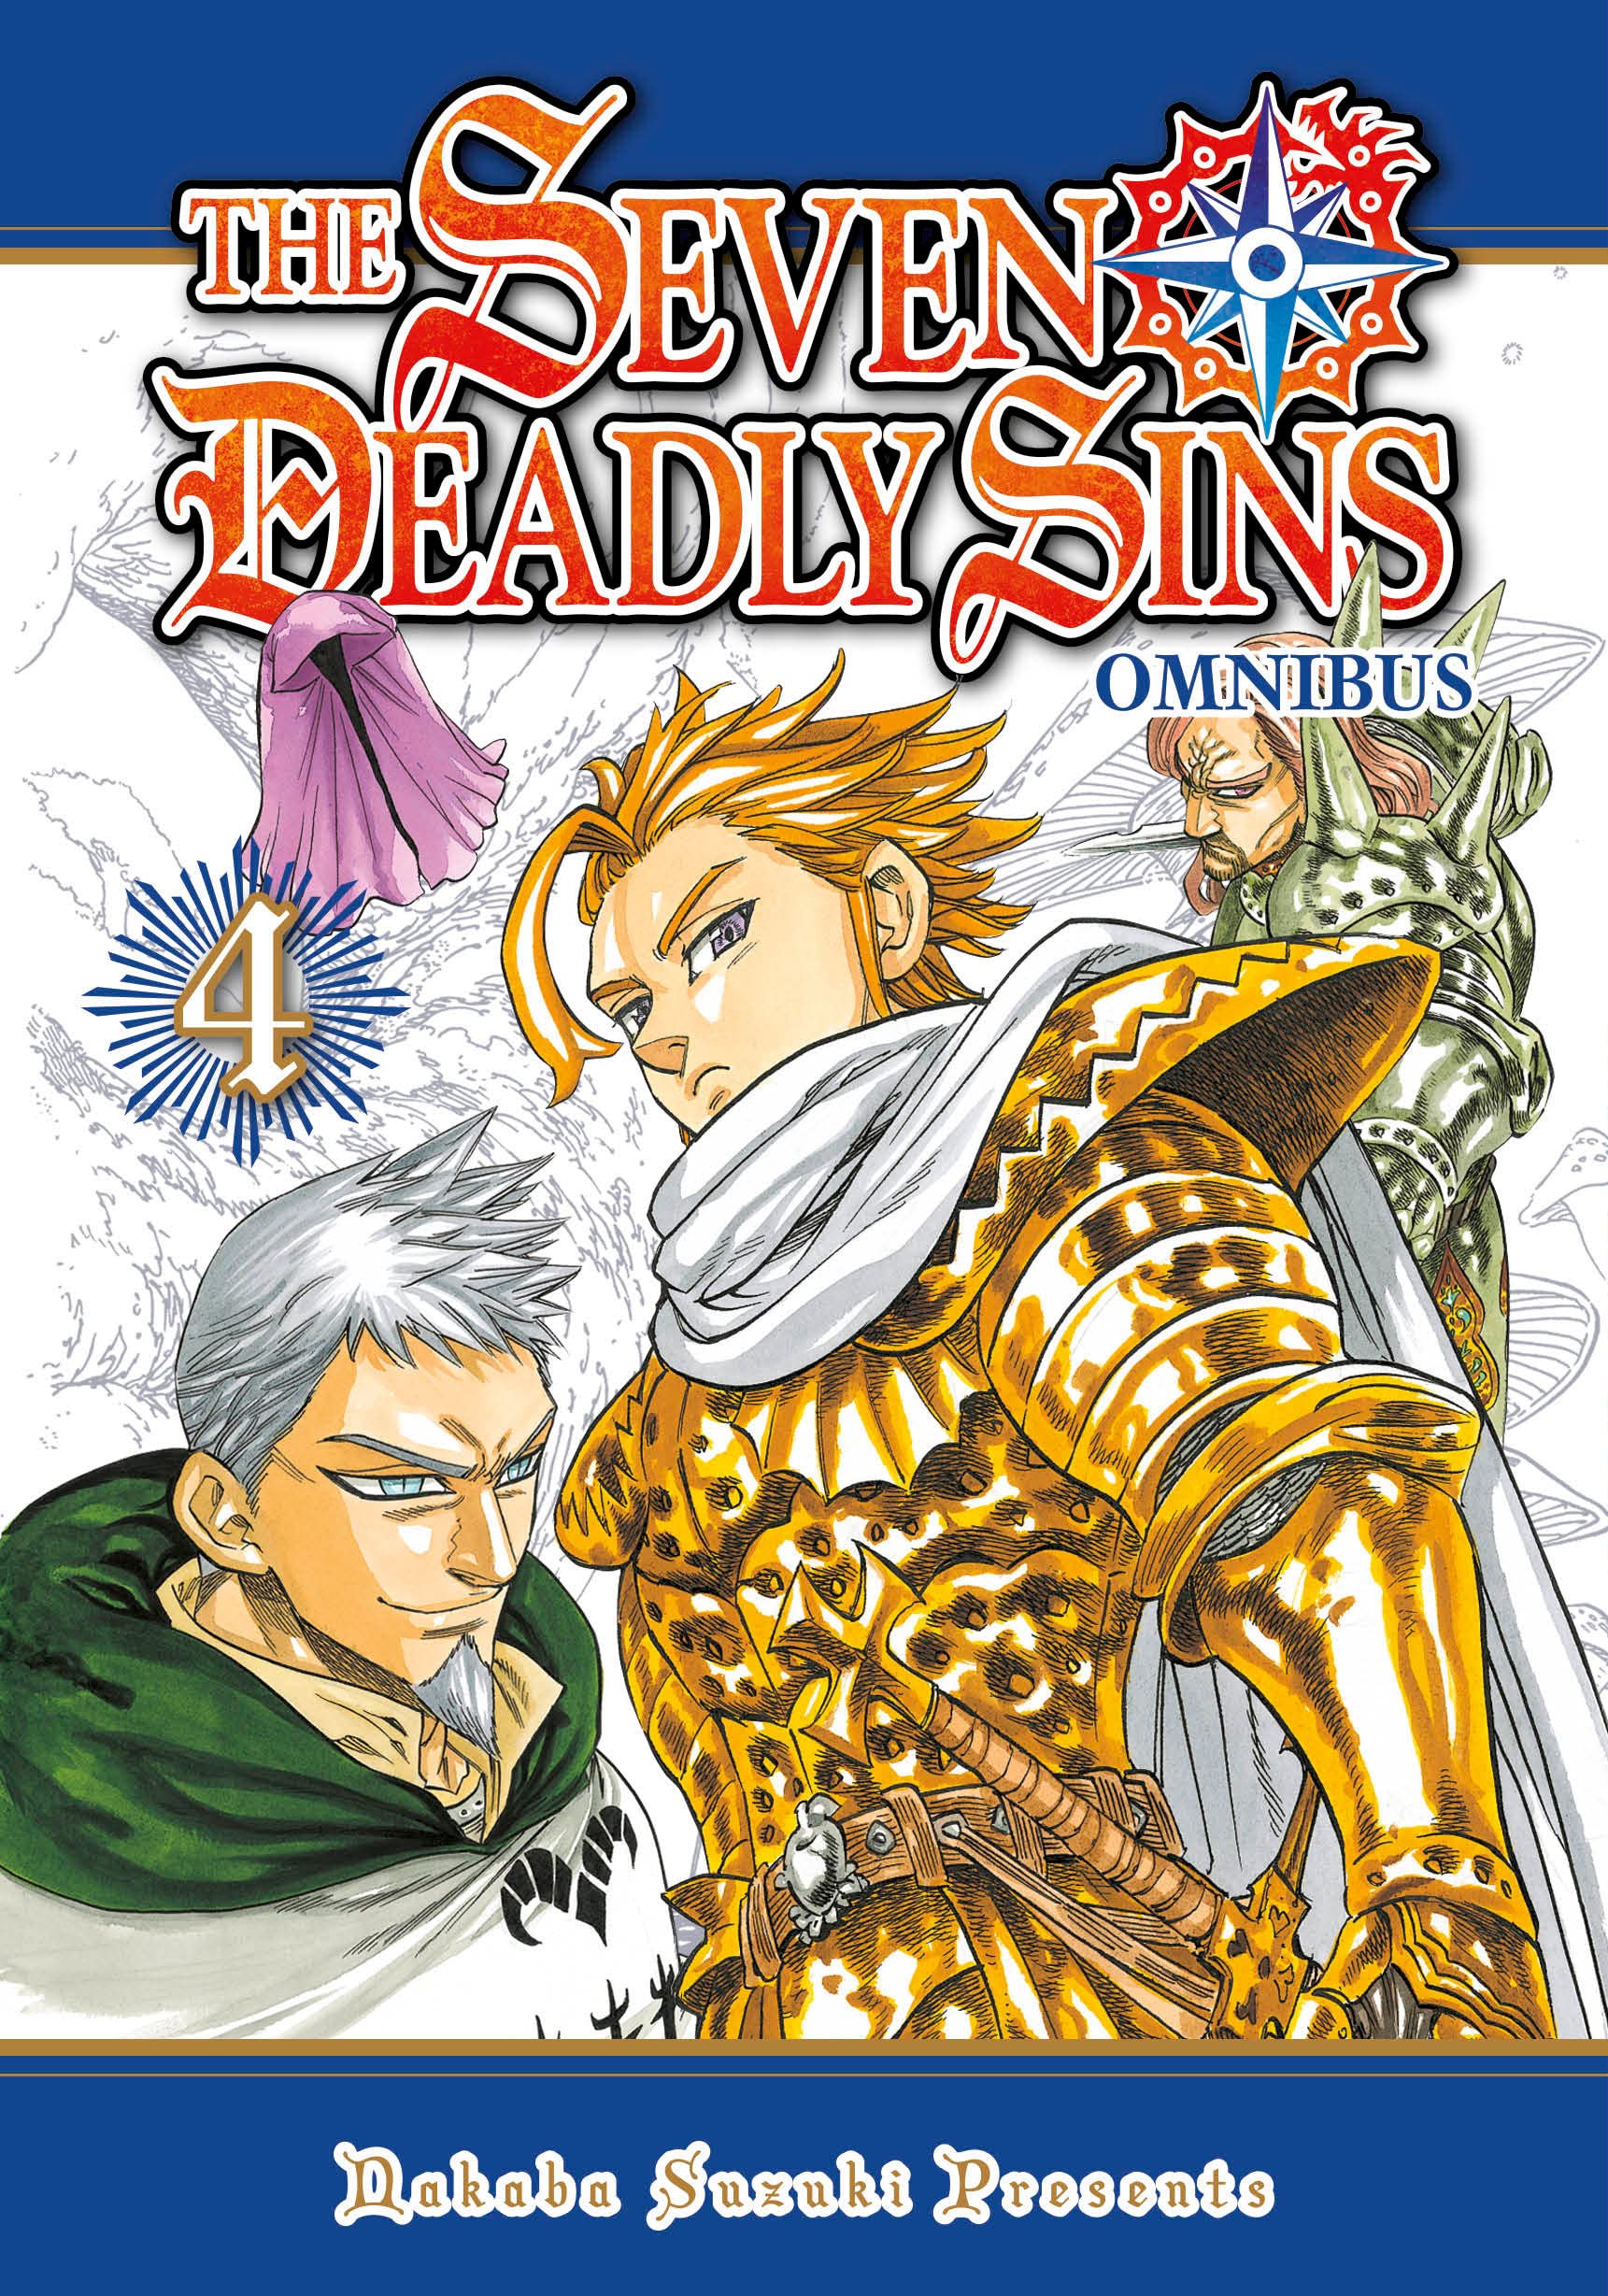 The Seven Deadly Sins 3 in 1 - Omnibus 4 - Volumes 10-12